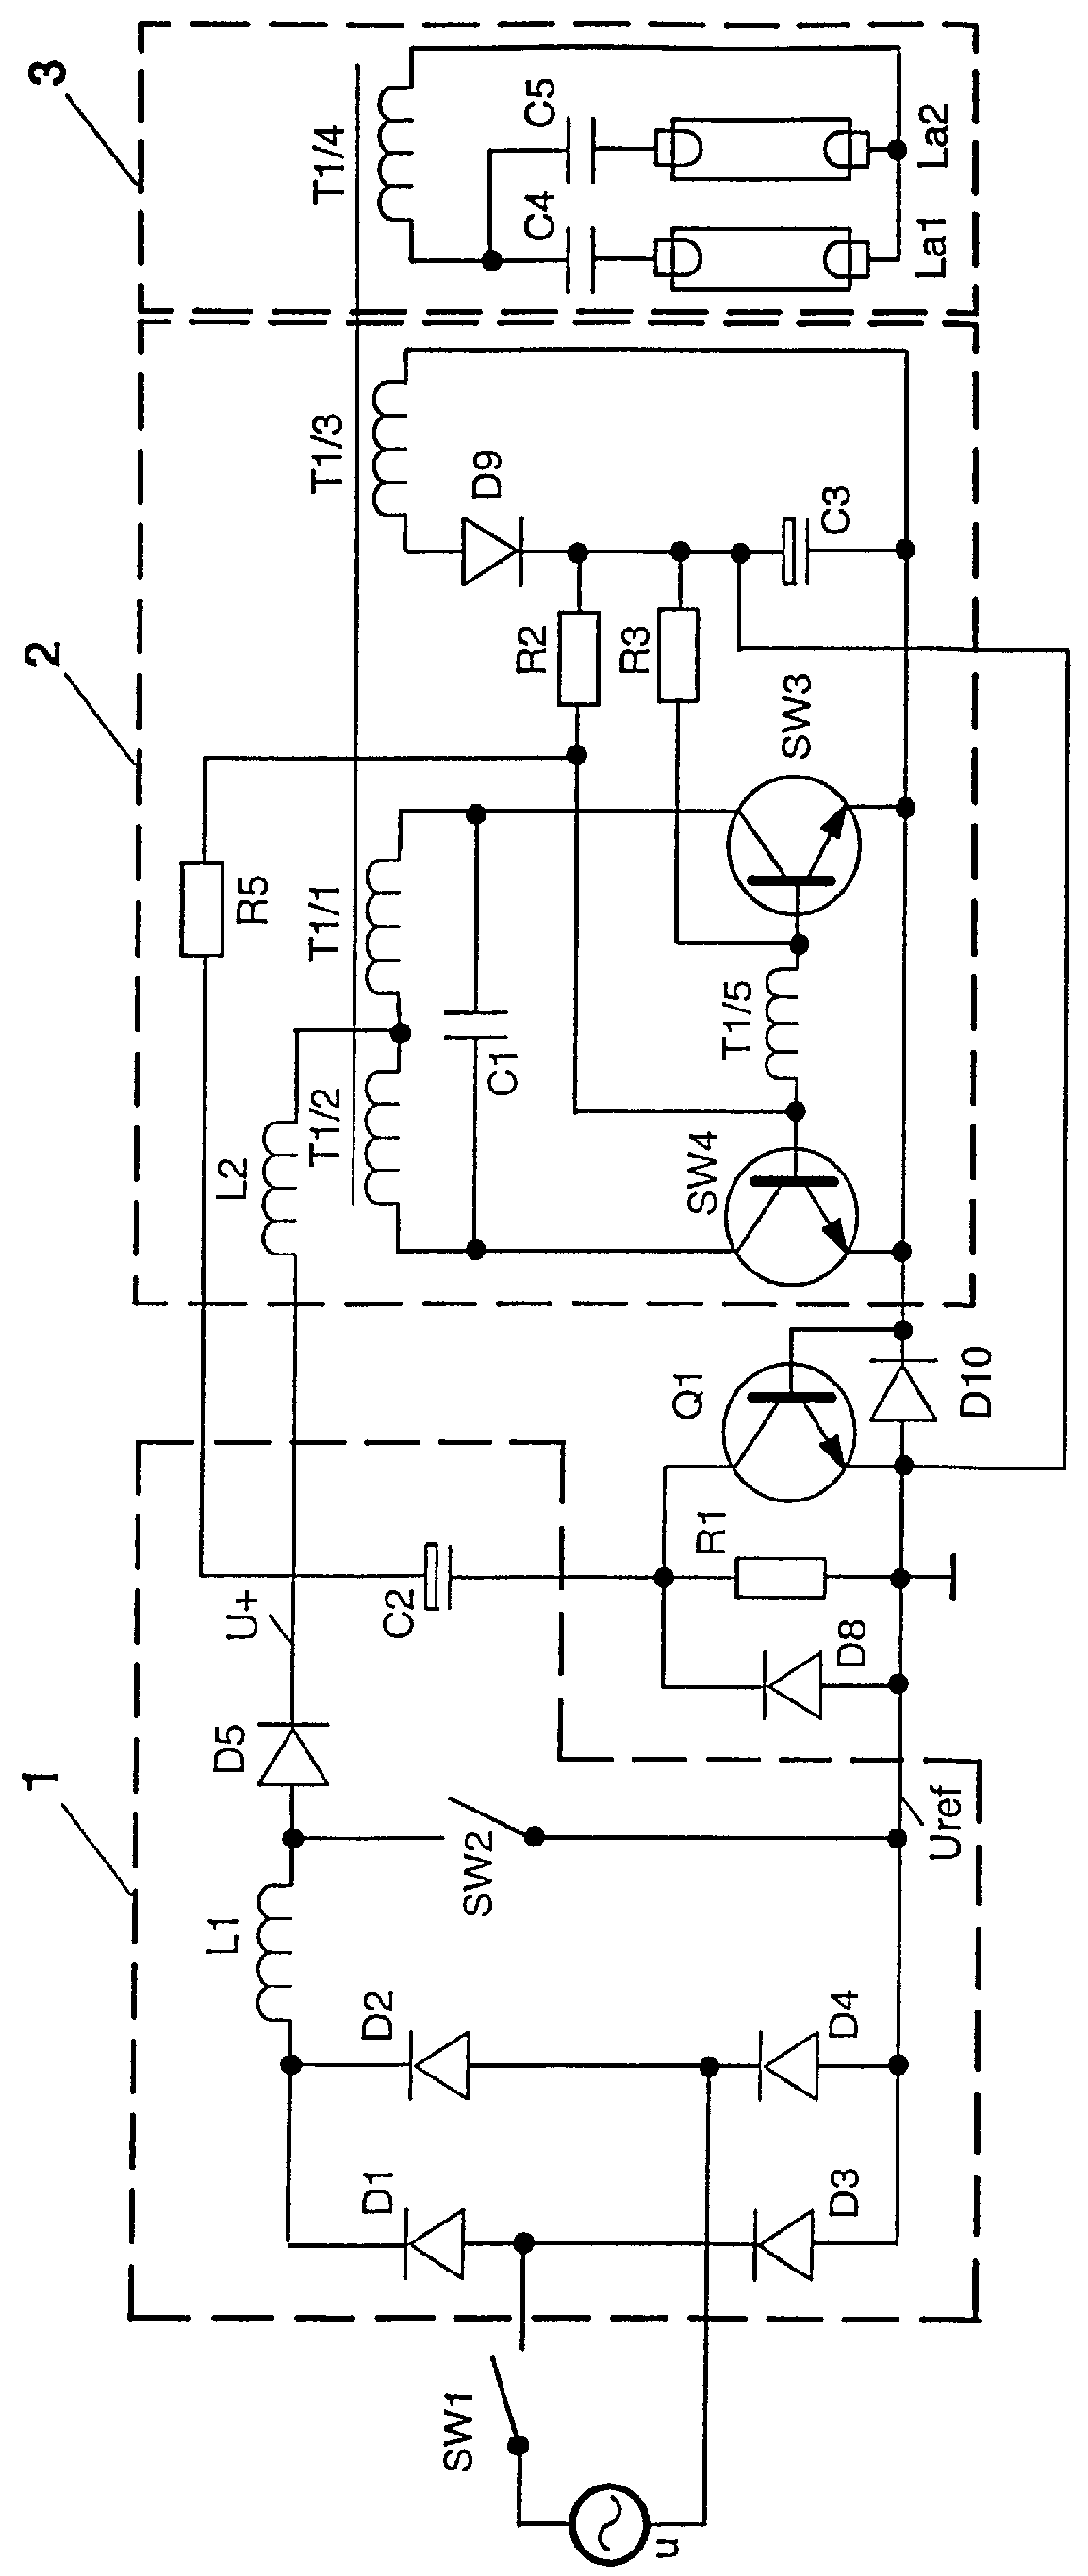 Electronic ballast with inrush current limiting